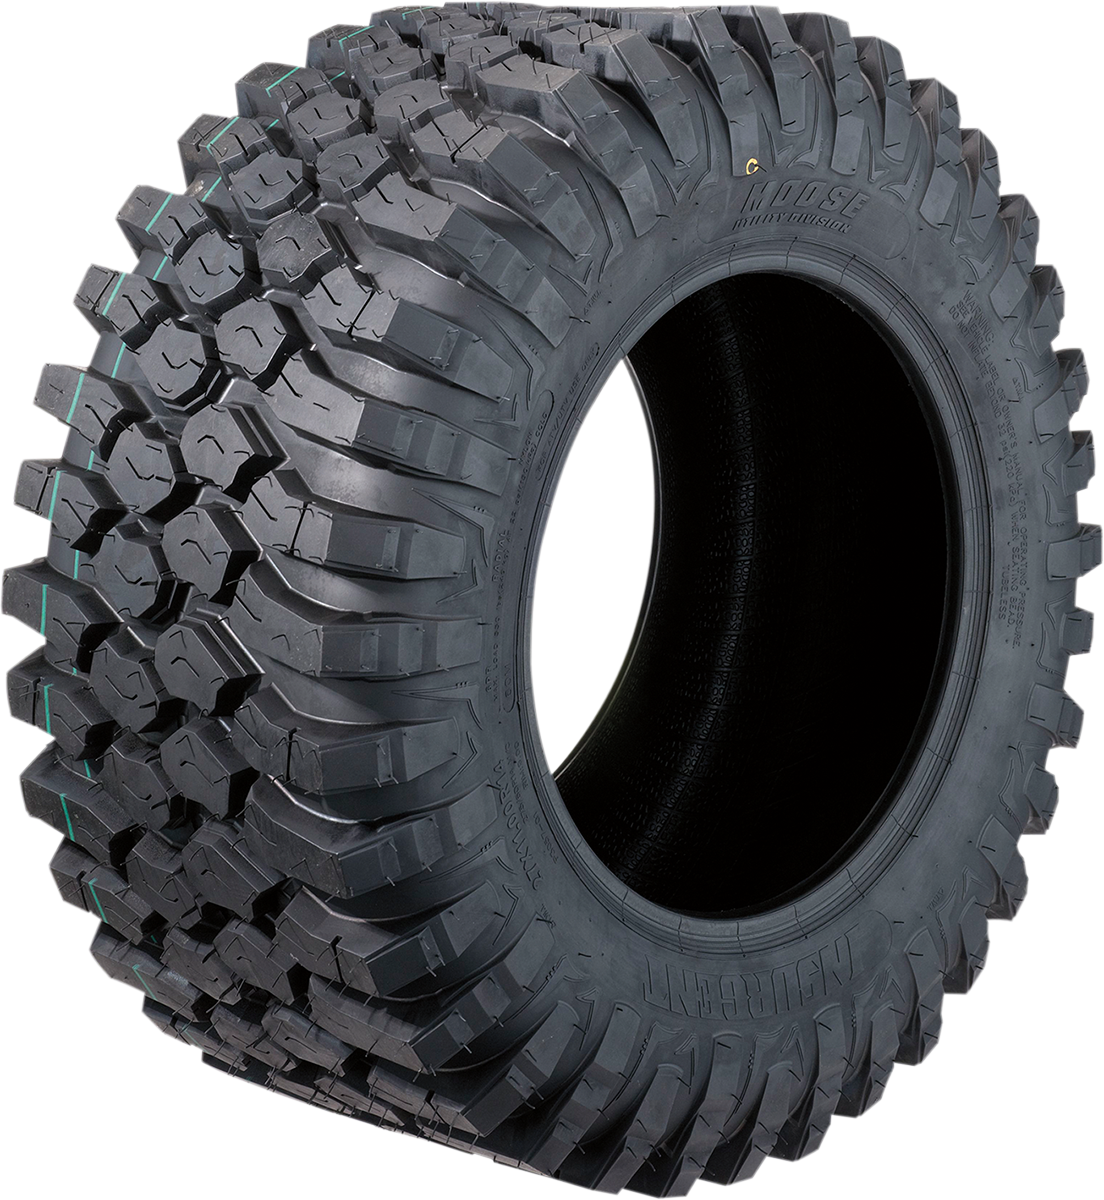 MOOSE UTILITY Tire - Insurgent - Front/Rear - 32x10R15 - 8 Ply 30573210158RDOT